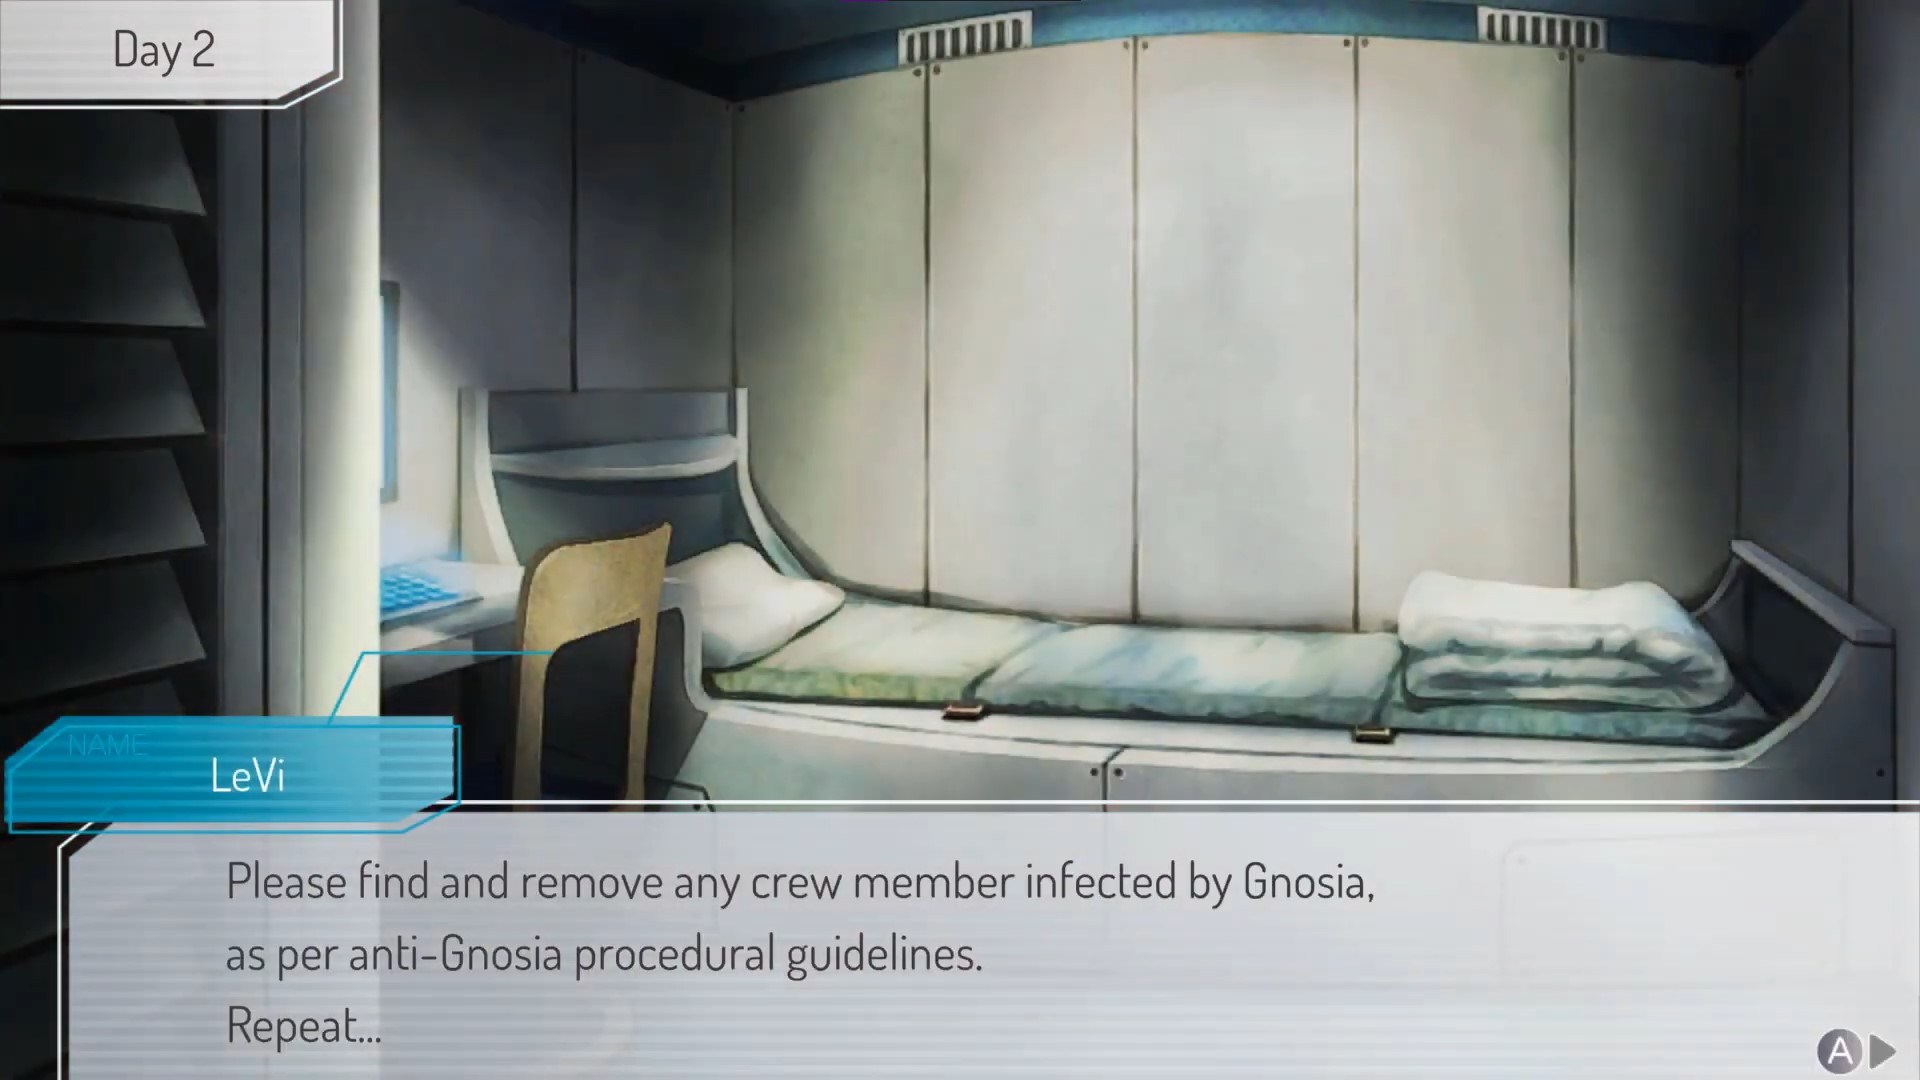 Gnosia screenshot that says "please find and remove any crew member infected by Gnosia, as per anti-Gnosia procedural guidelines. Repeat..."